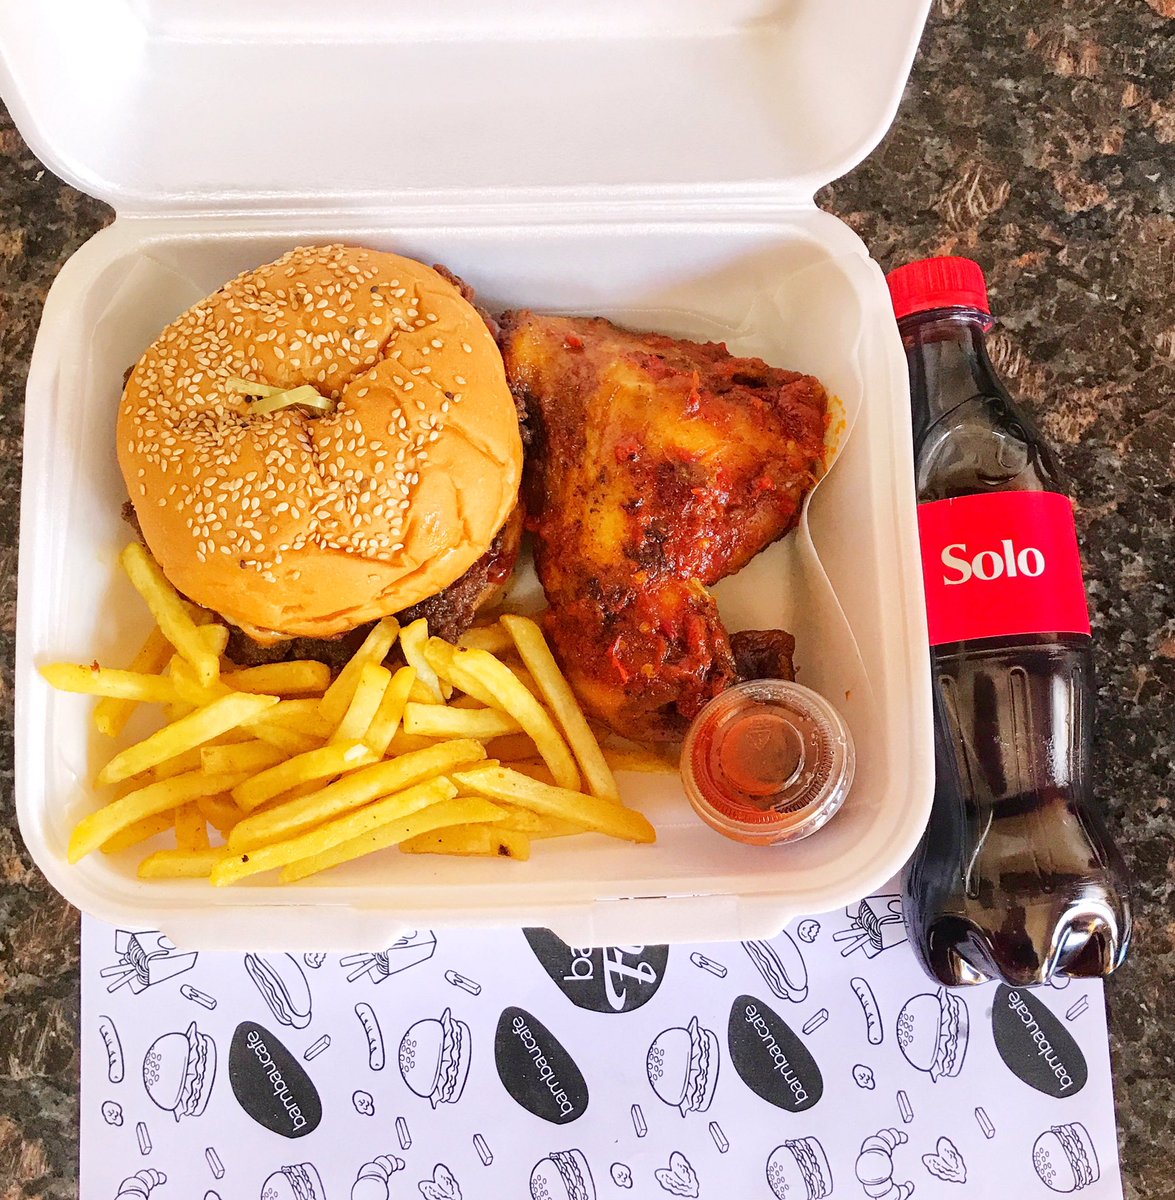 Burger 🍔🤤, food for the stomach, satisfaction for the heart.

Get our burger combo special today 
For just N3000

Call or text to order 0810062042

#EndSARS #PalmPayCarnival #Ronaldo #AddictedToErica #OZOHomeComing sniper WAEC Davido Catholics Travis Jowo Snapchat